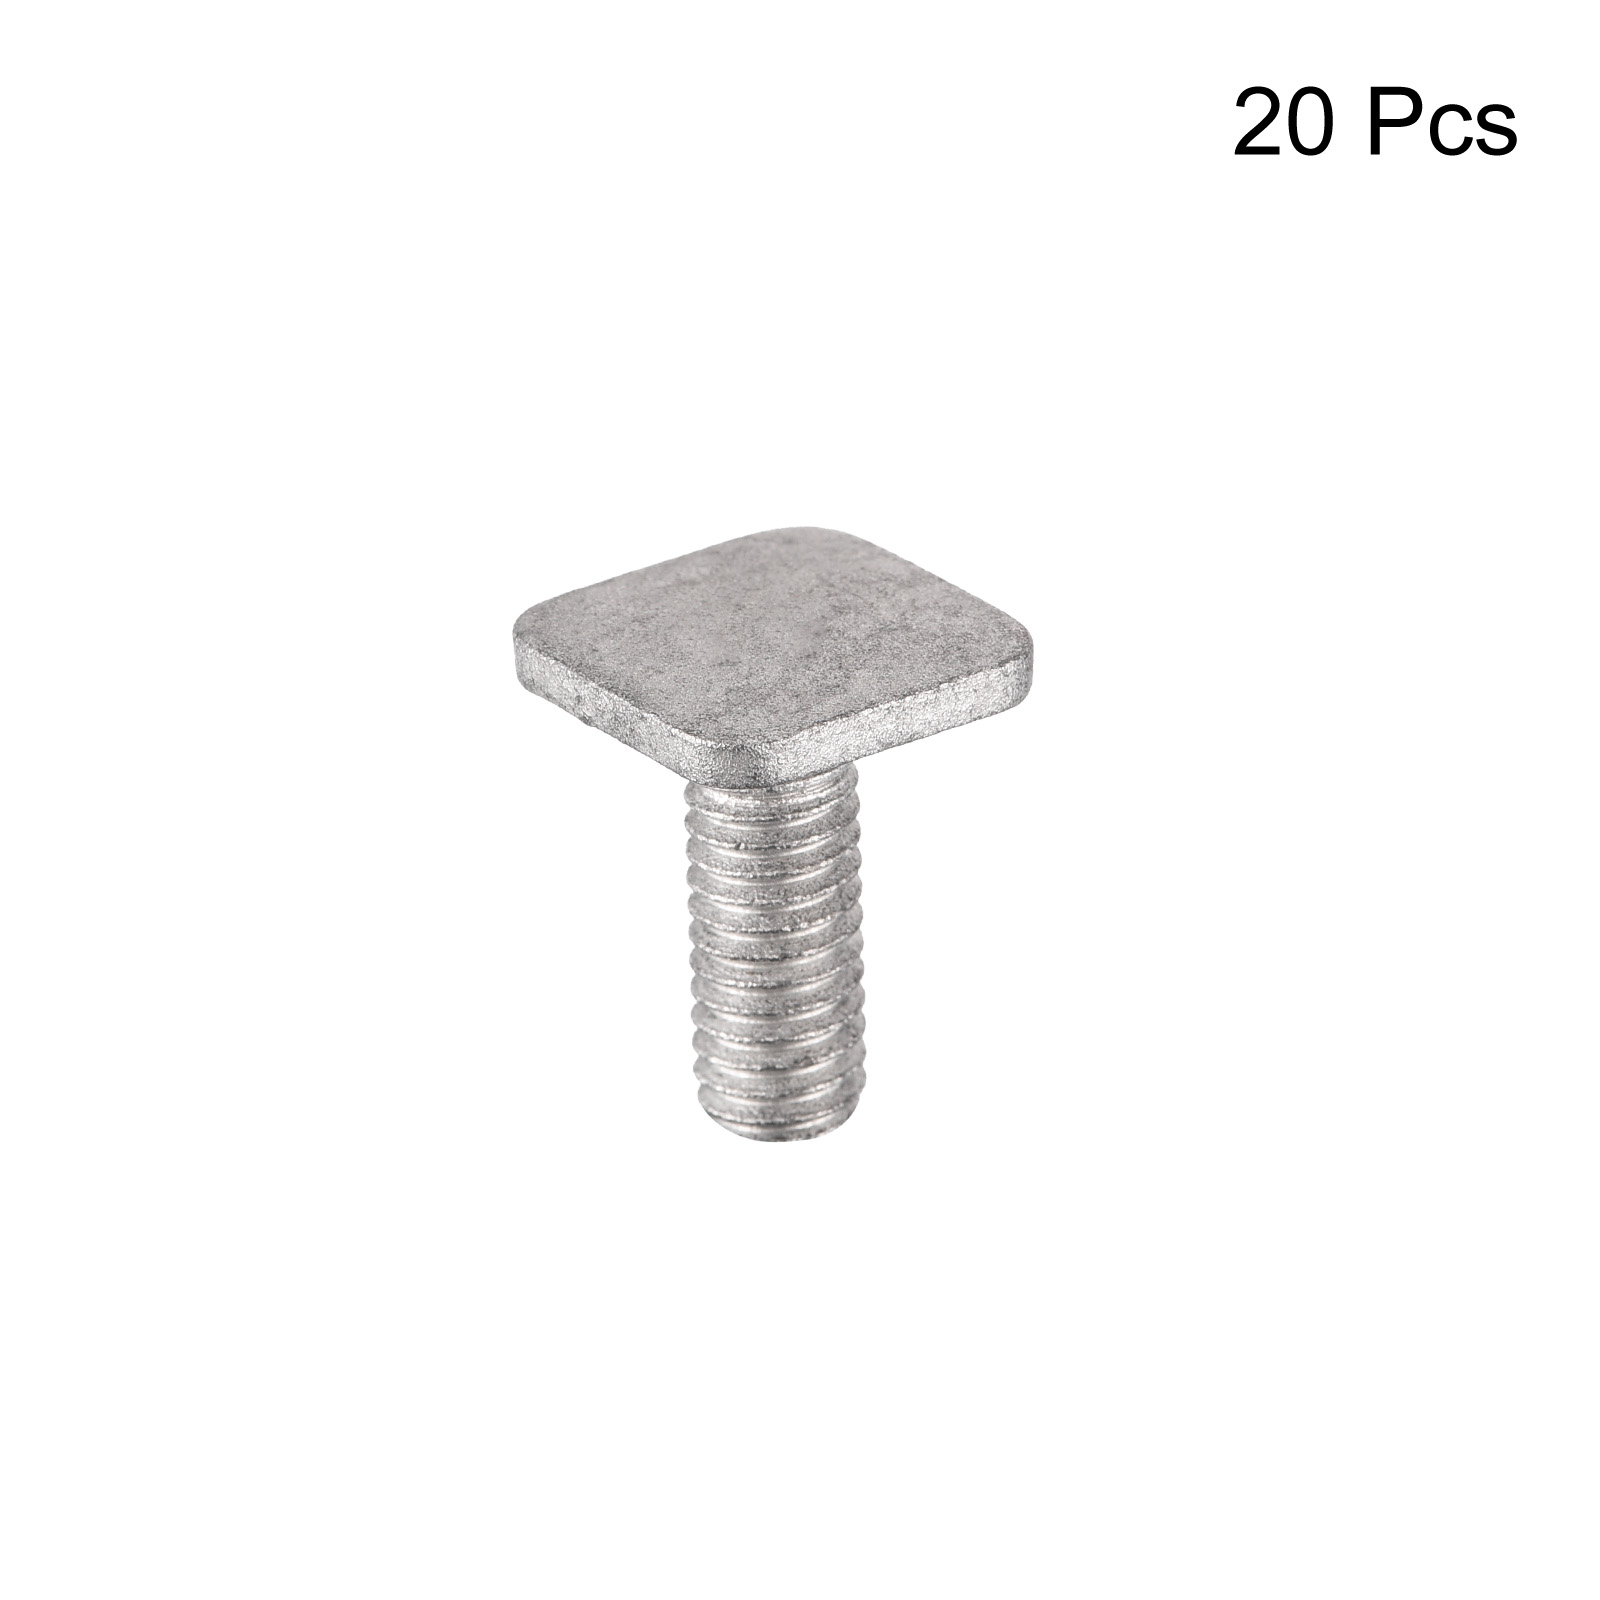 Square Head Bolt, 20 Pack M6x16mm Carbon Steel Grade 8.8 Square Screws, Gray - image 3 of 5